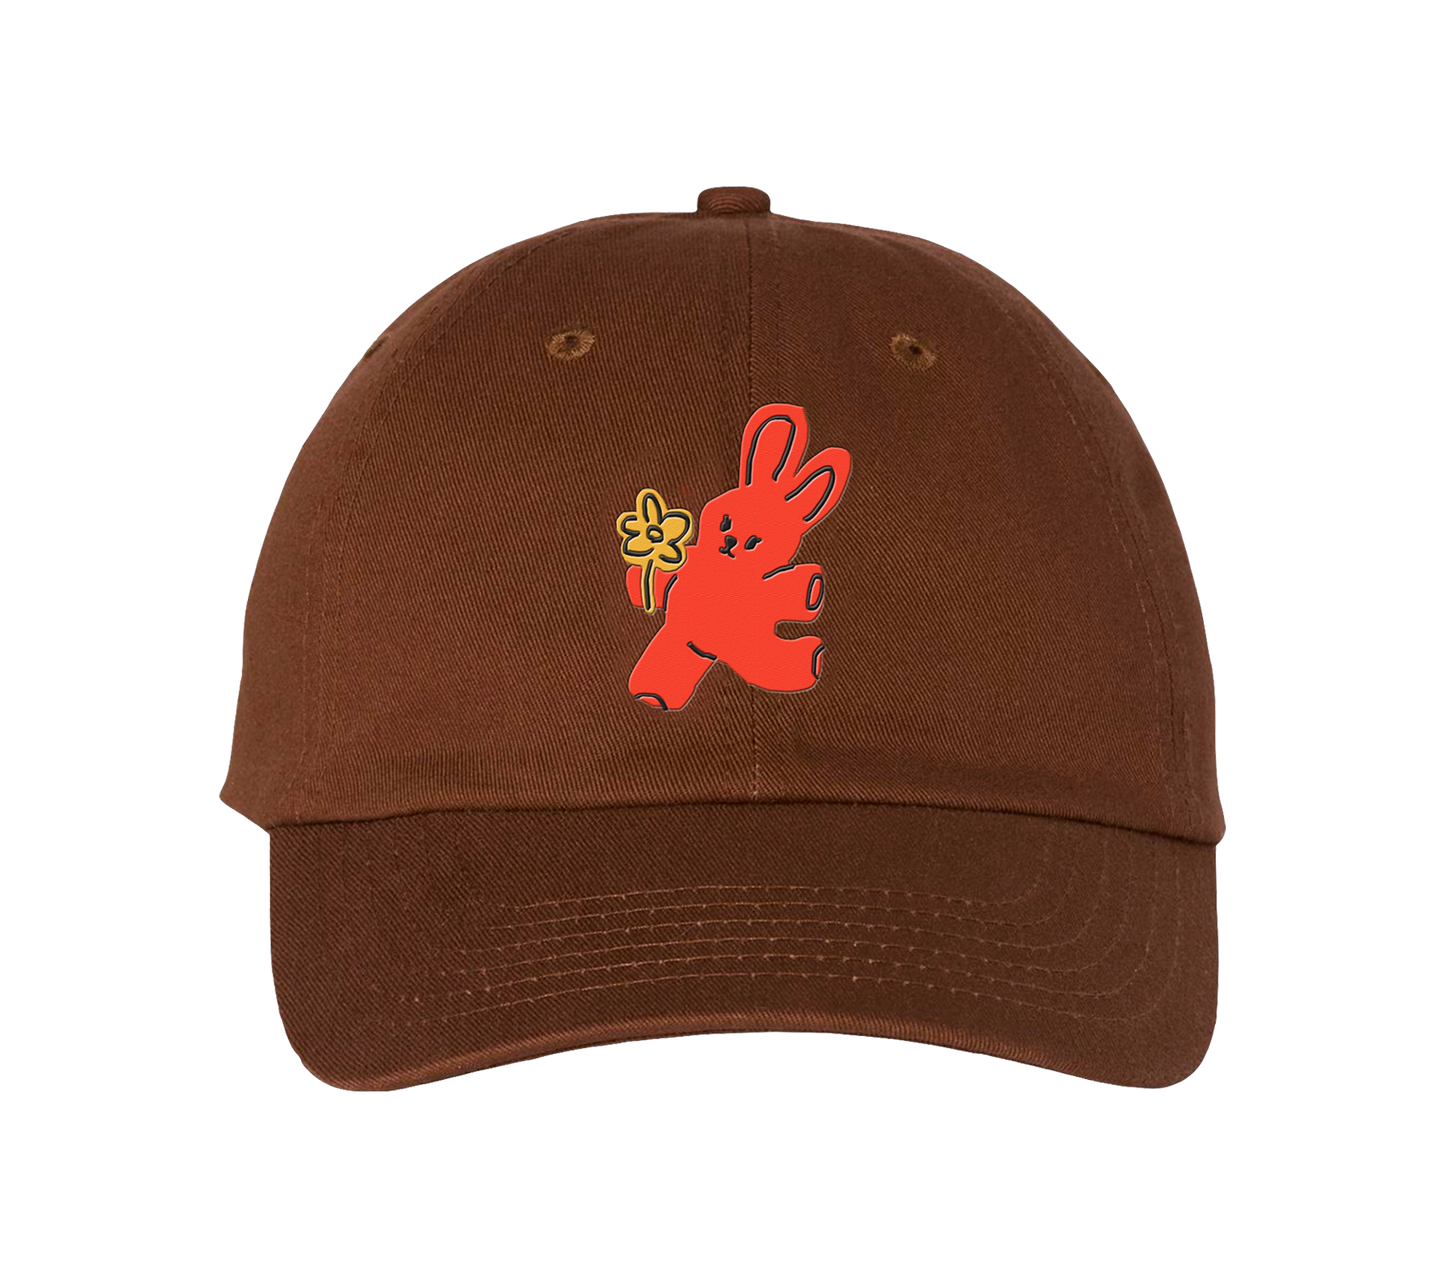 Bunny Embroidered Dad Hat